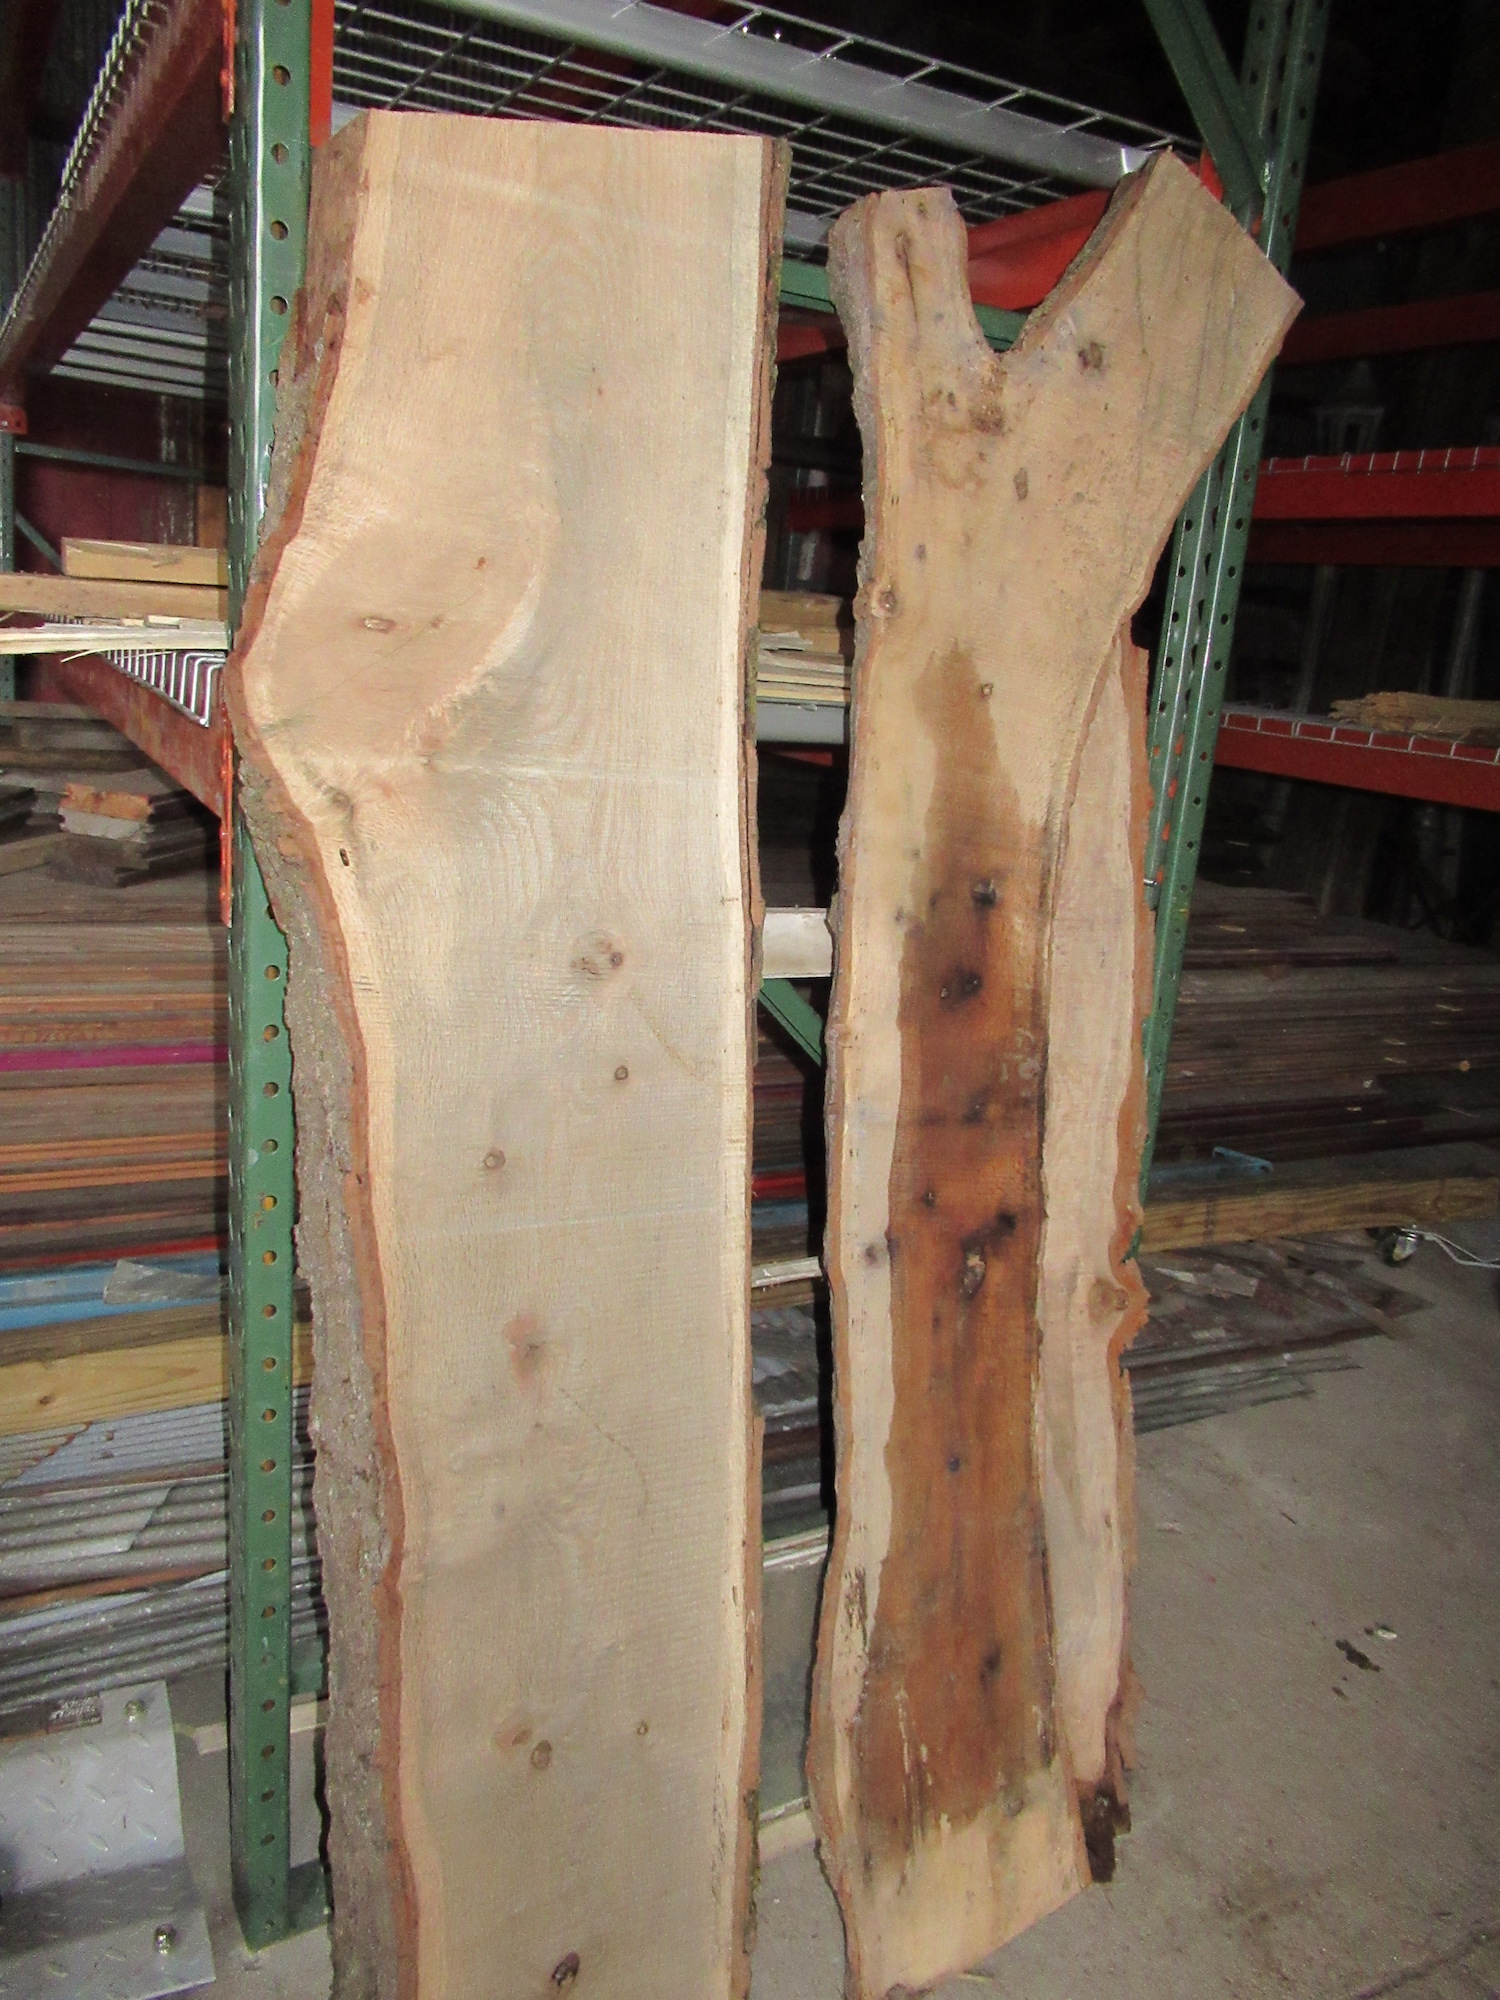 Live edge slabs propped up in the warehouse